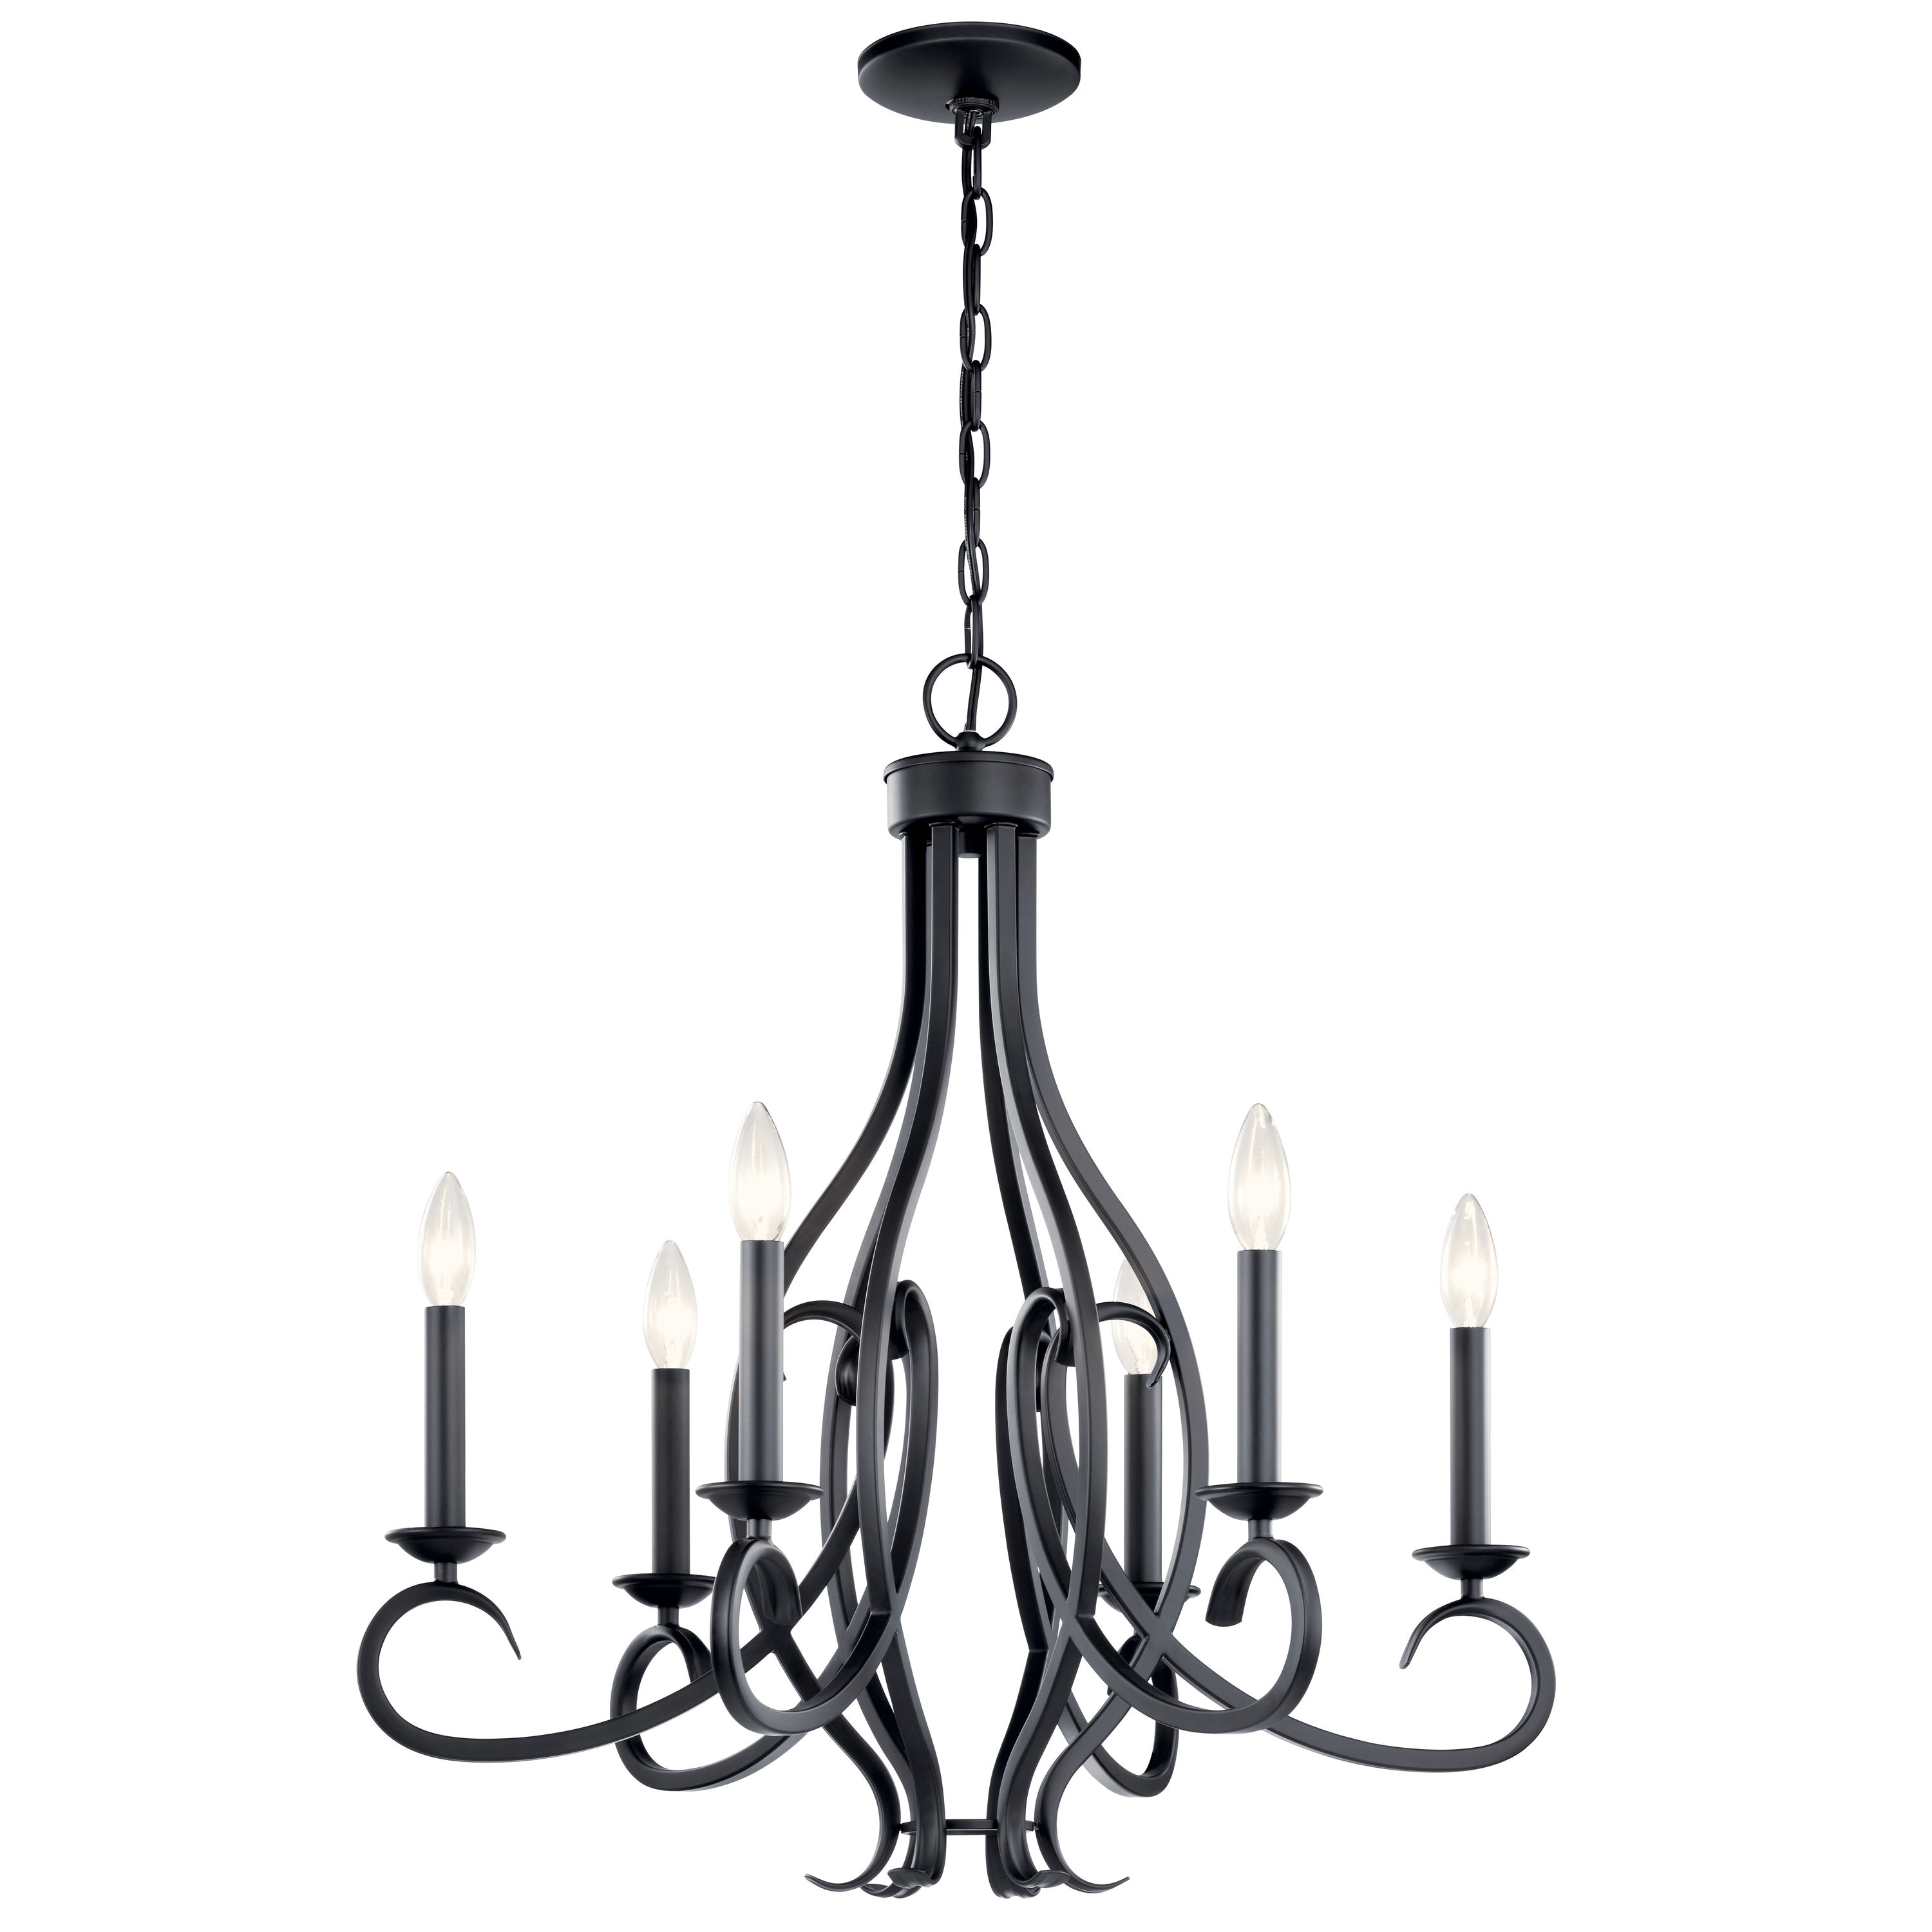 Kichler Ania 6-Light Black Traditional Dry rated Chandelier in the ...